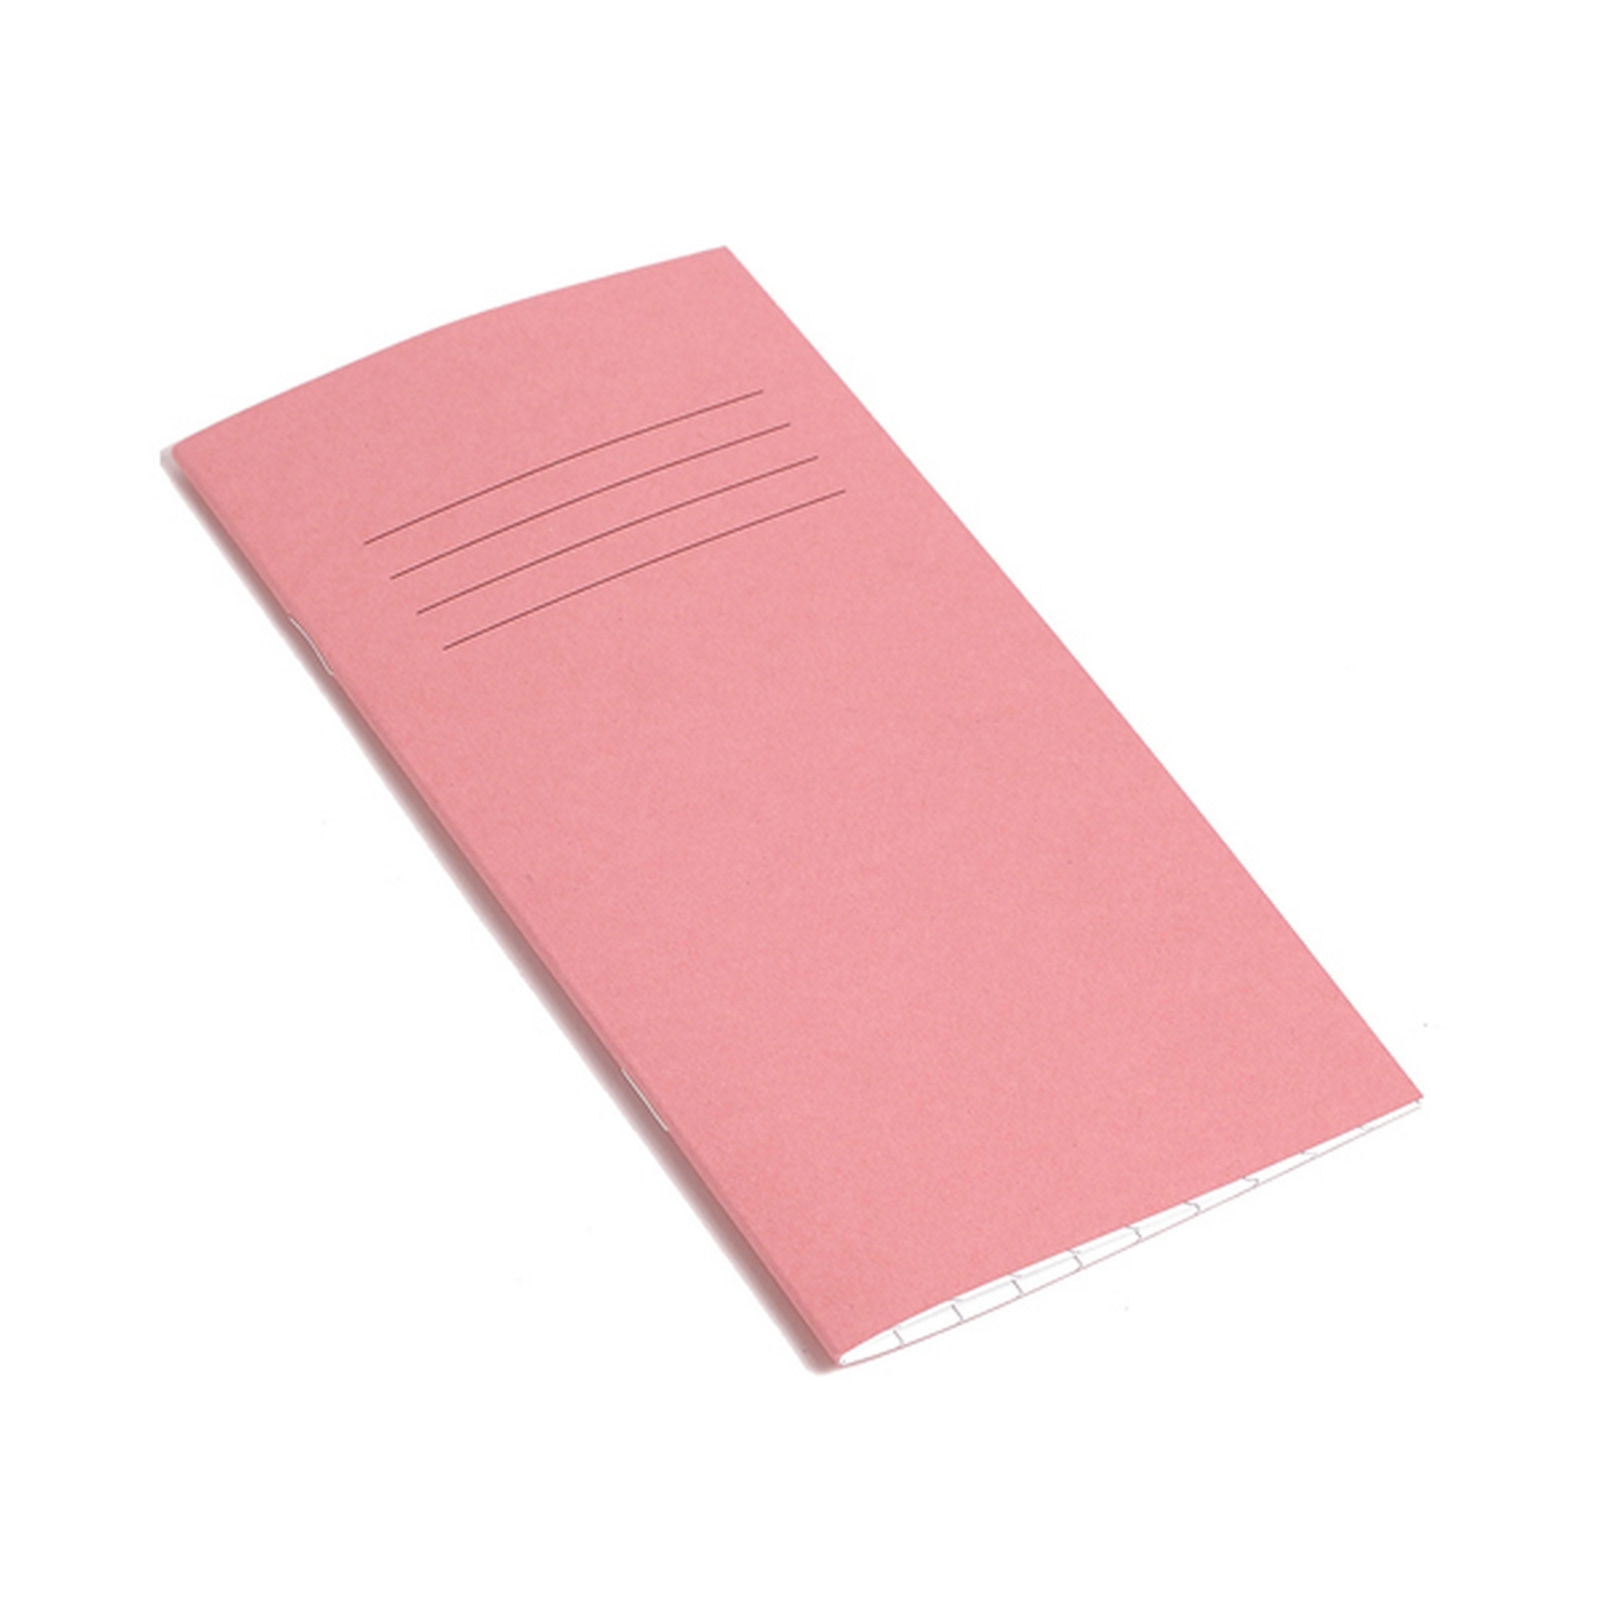 8 x 4"/200 x 100mm Pink Cover 10mm Squared Vocabulary Book - 32 Pages - Pack of 100